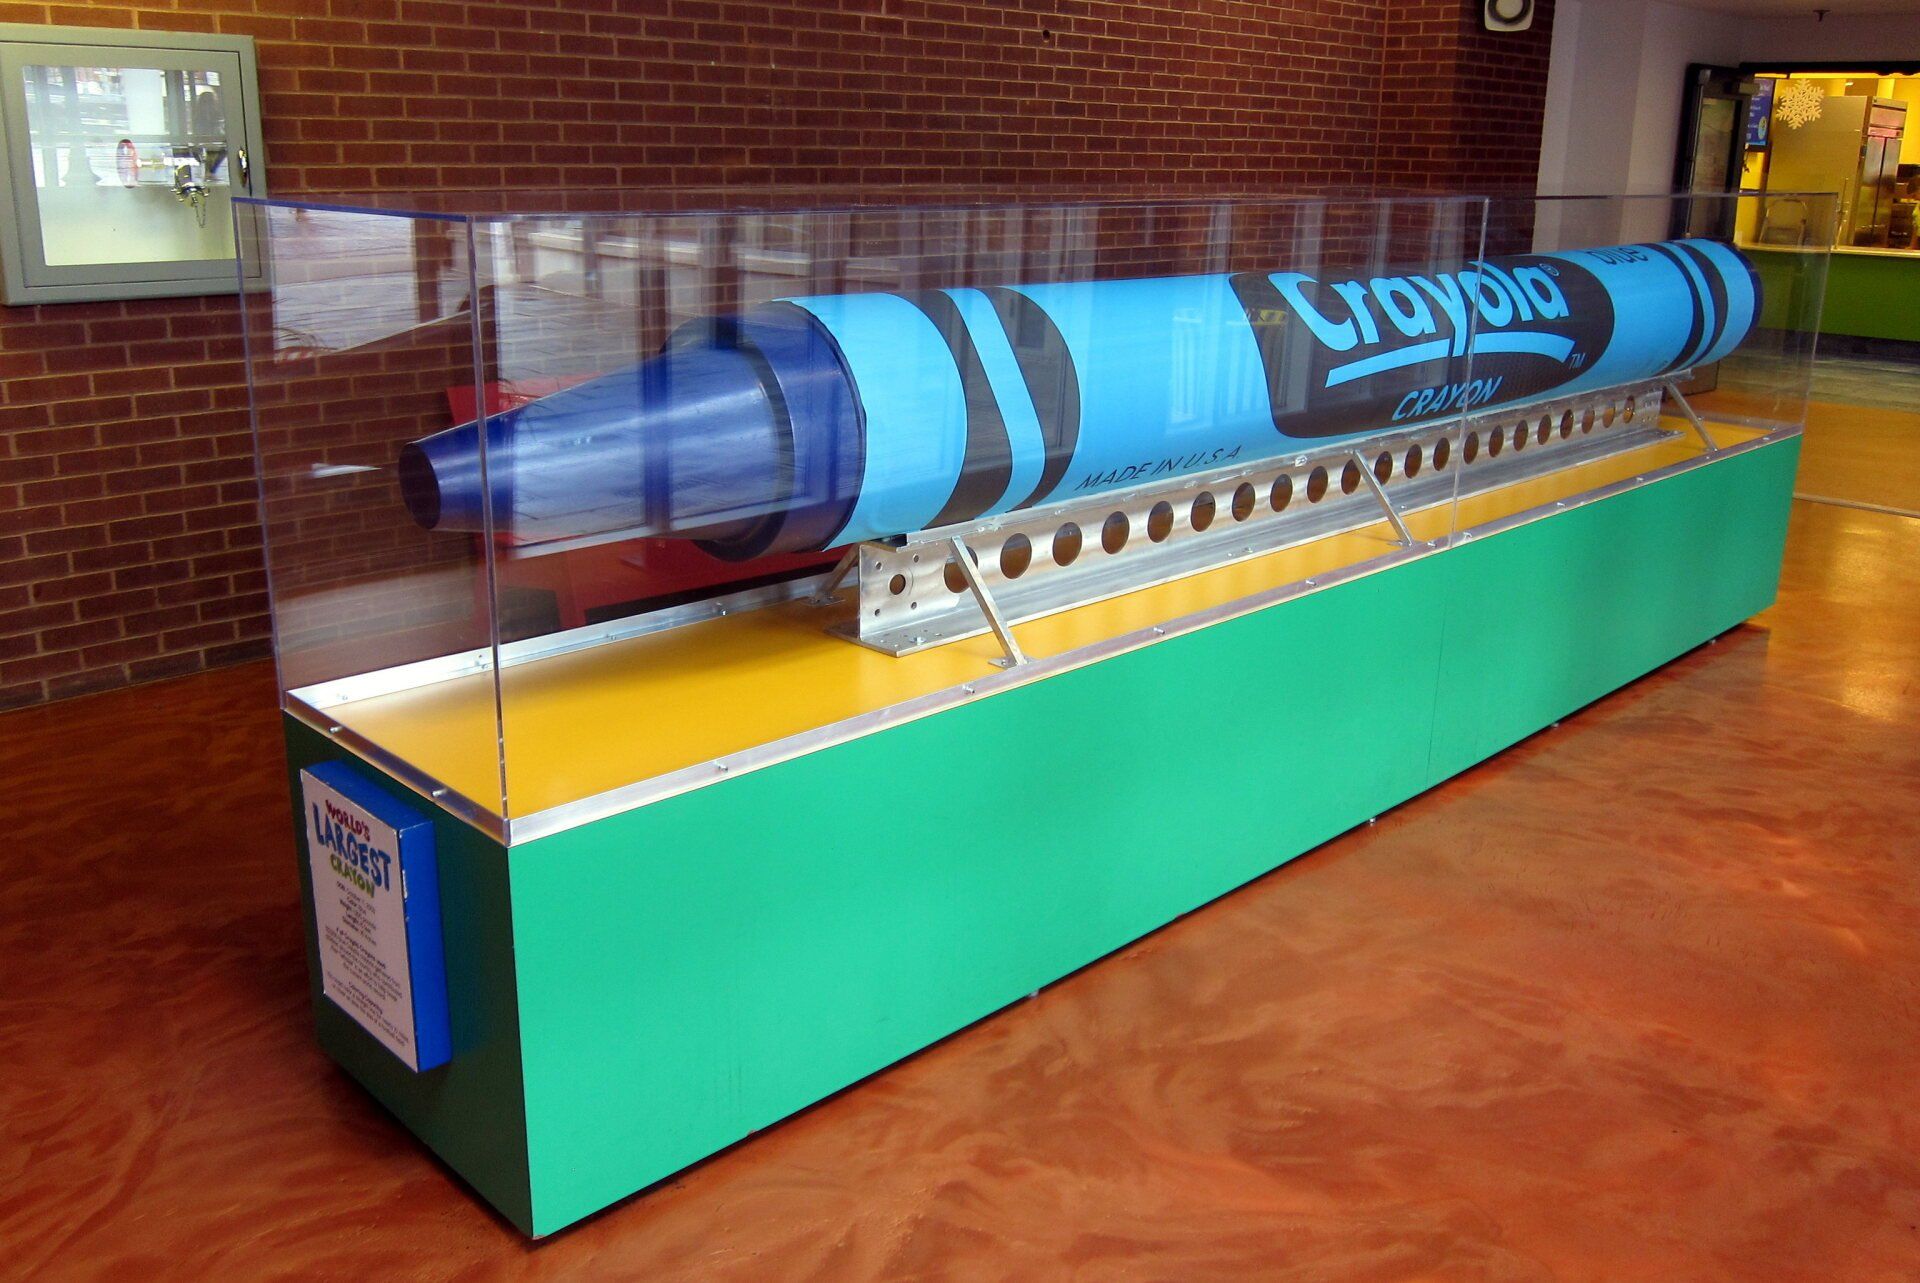 Largest colored crayon: world record set by Crayola